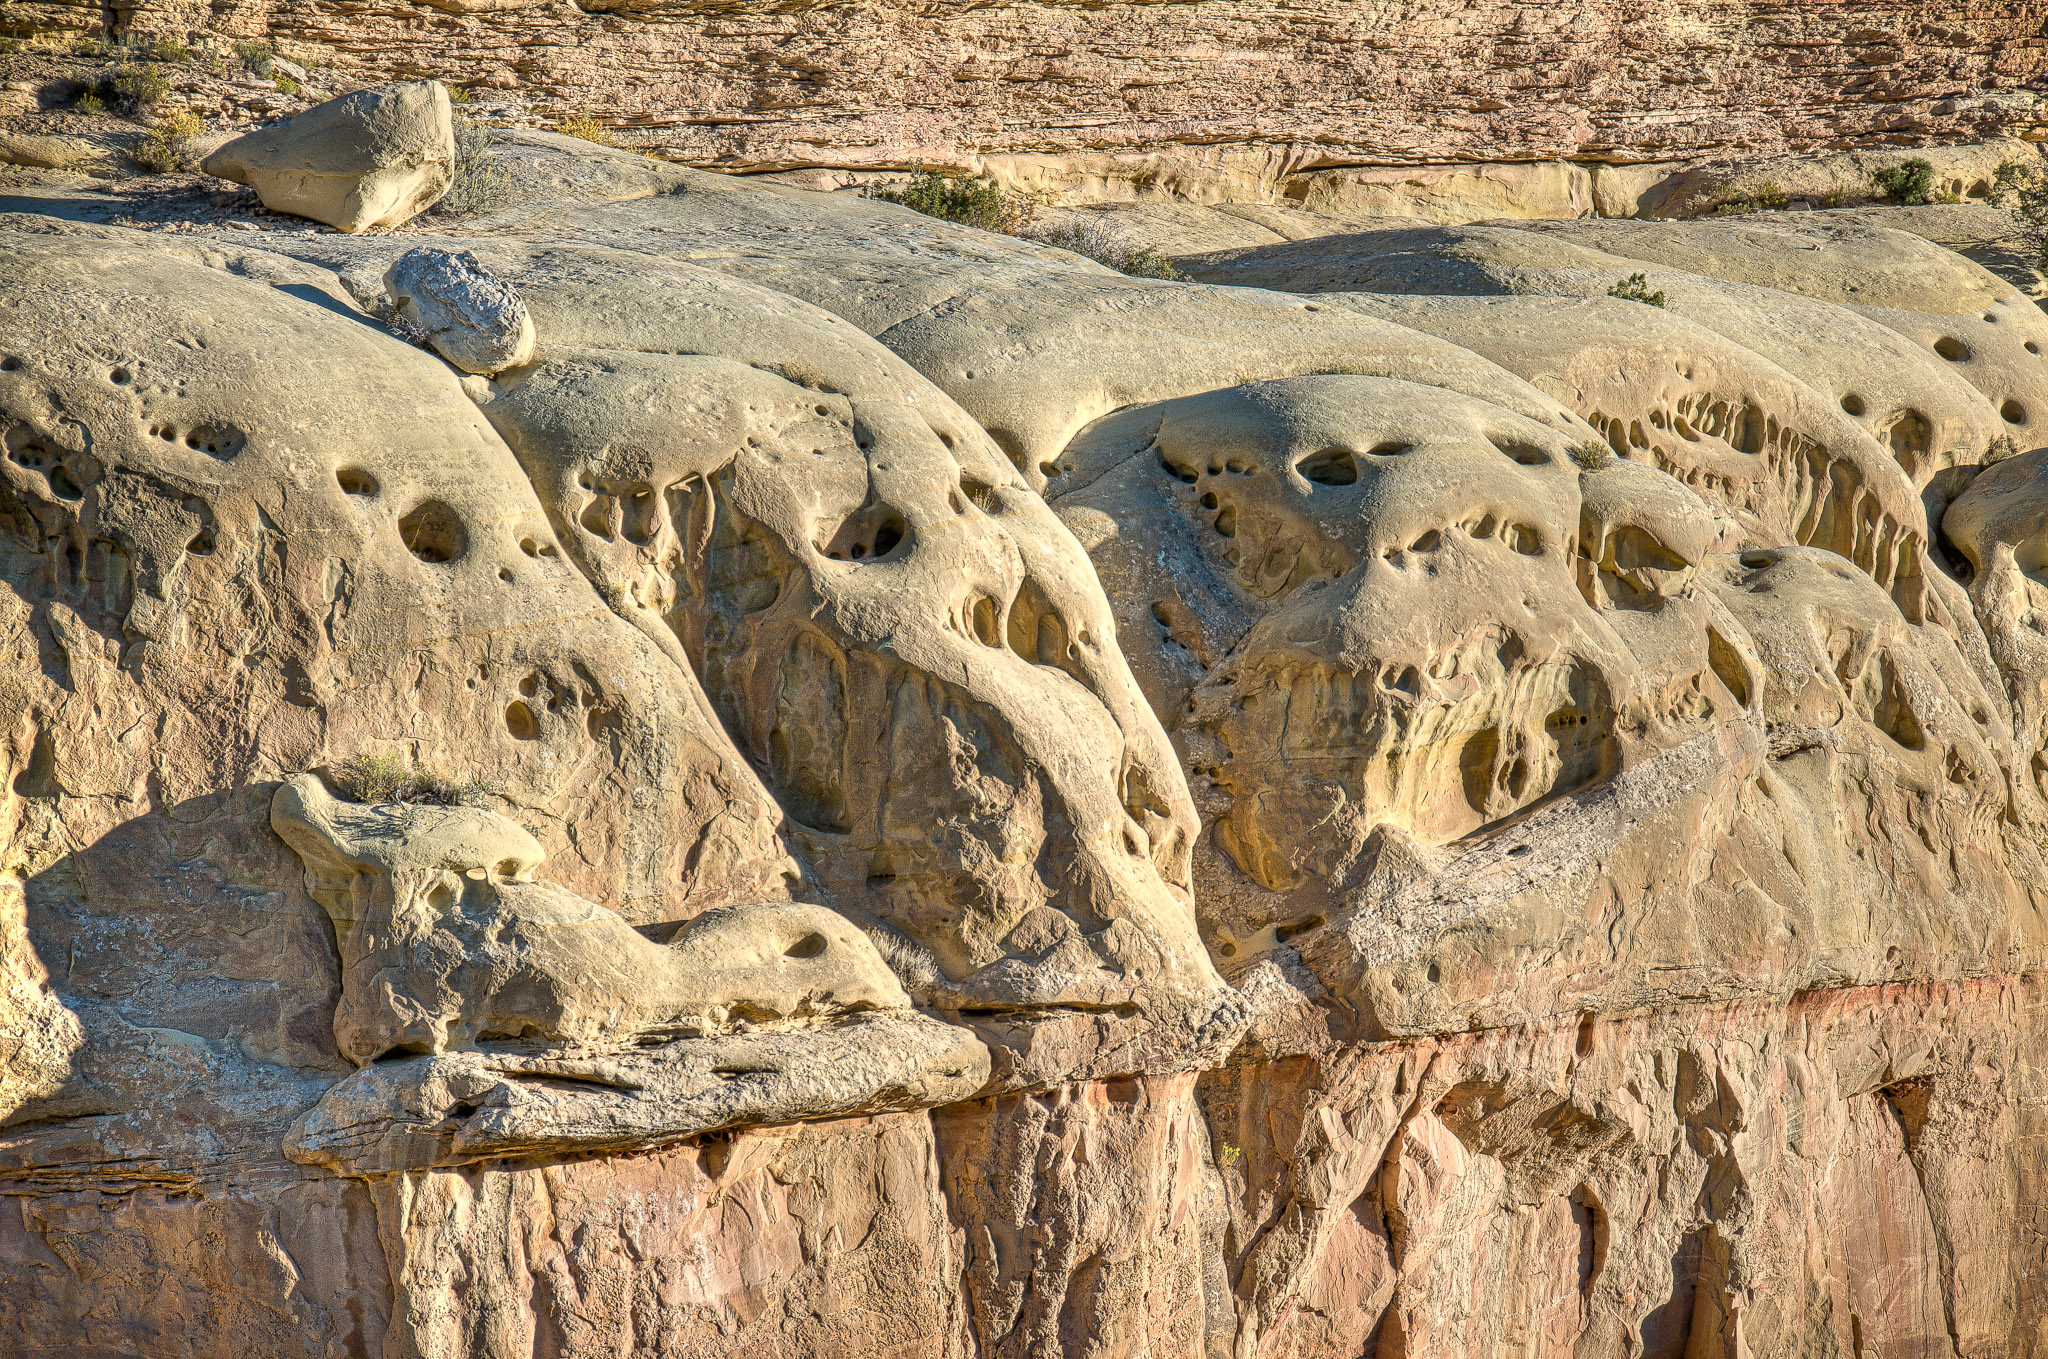 Rounded features at Turtle Rock that many feel resemble human skulls. On Cub Creek Road in Dinosaur National Monument near Jensen, Utah.